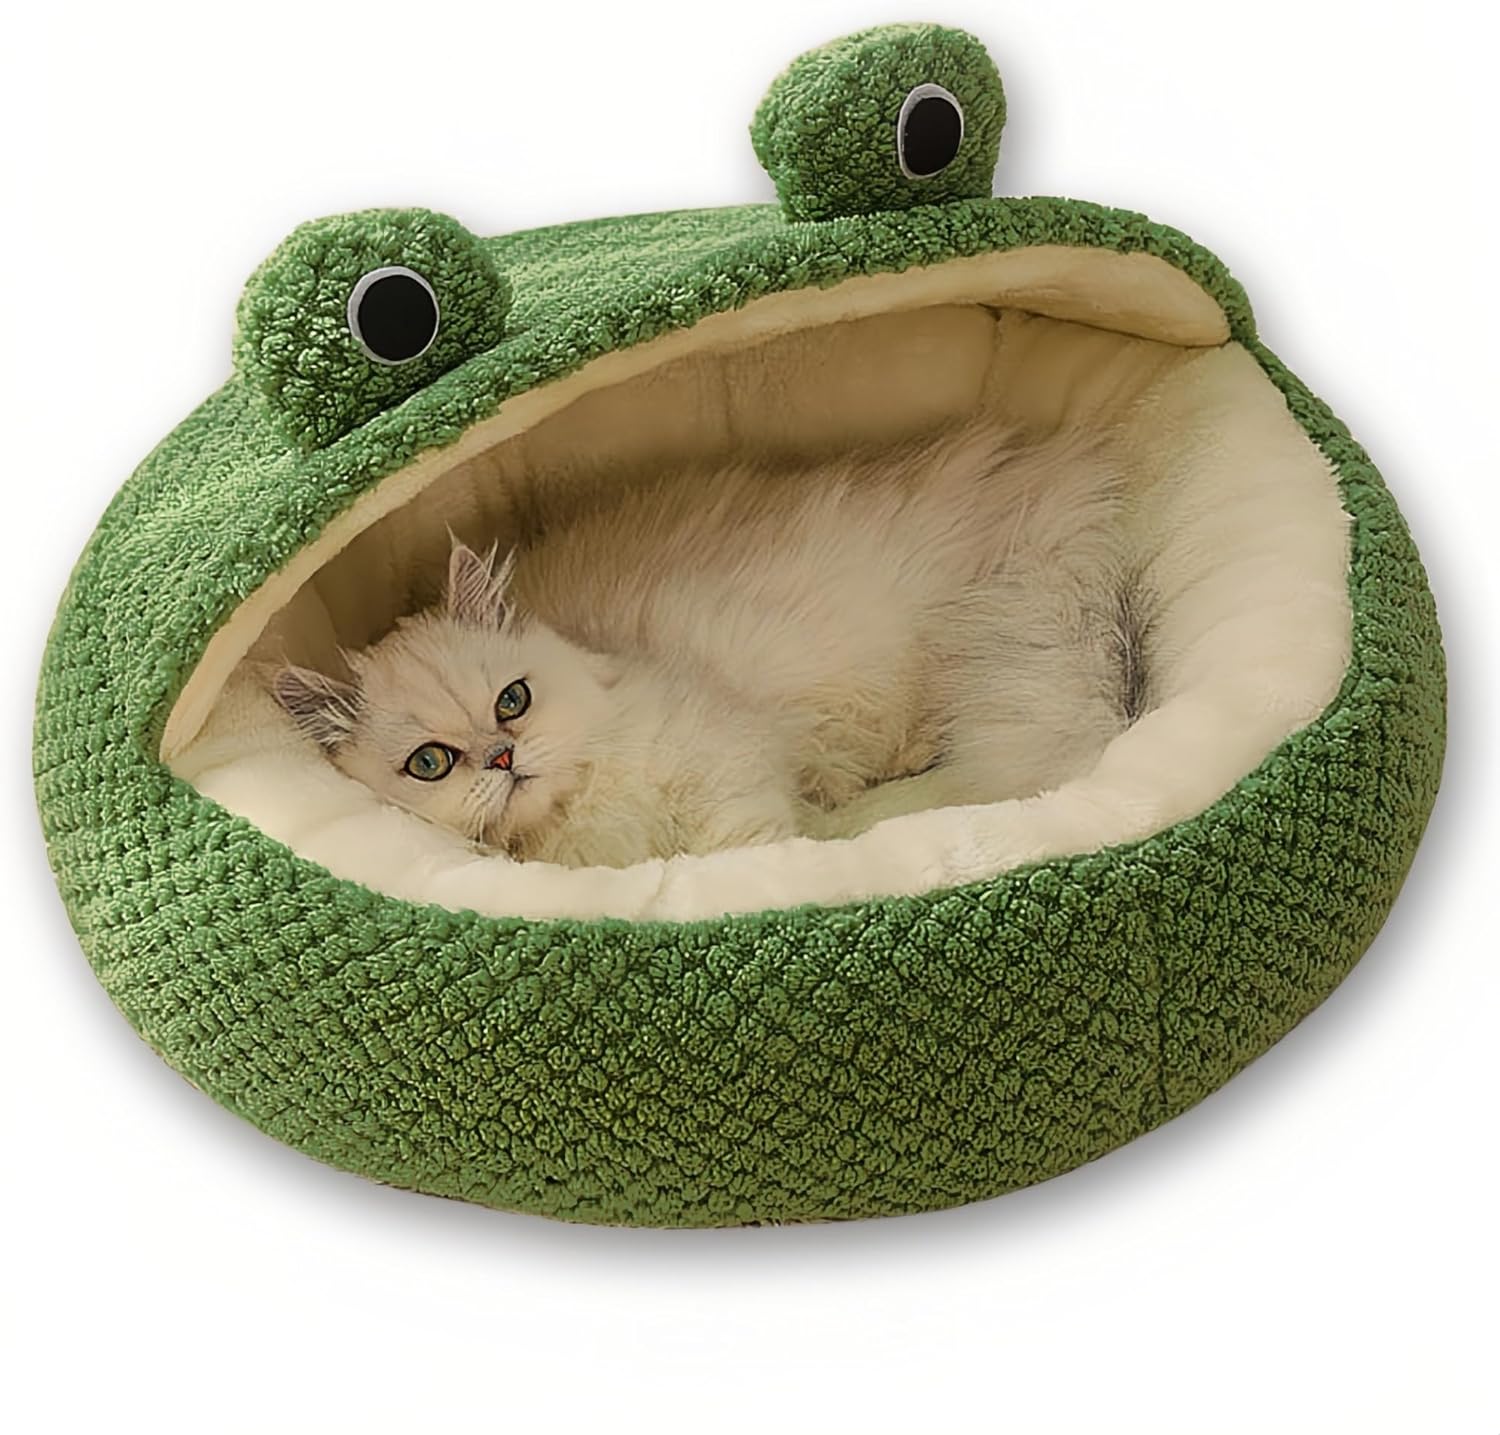 Cute Frog Pet Bed Review